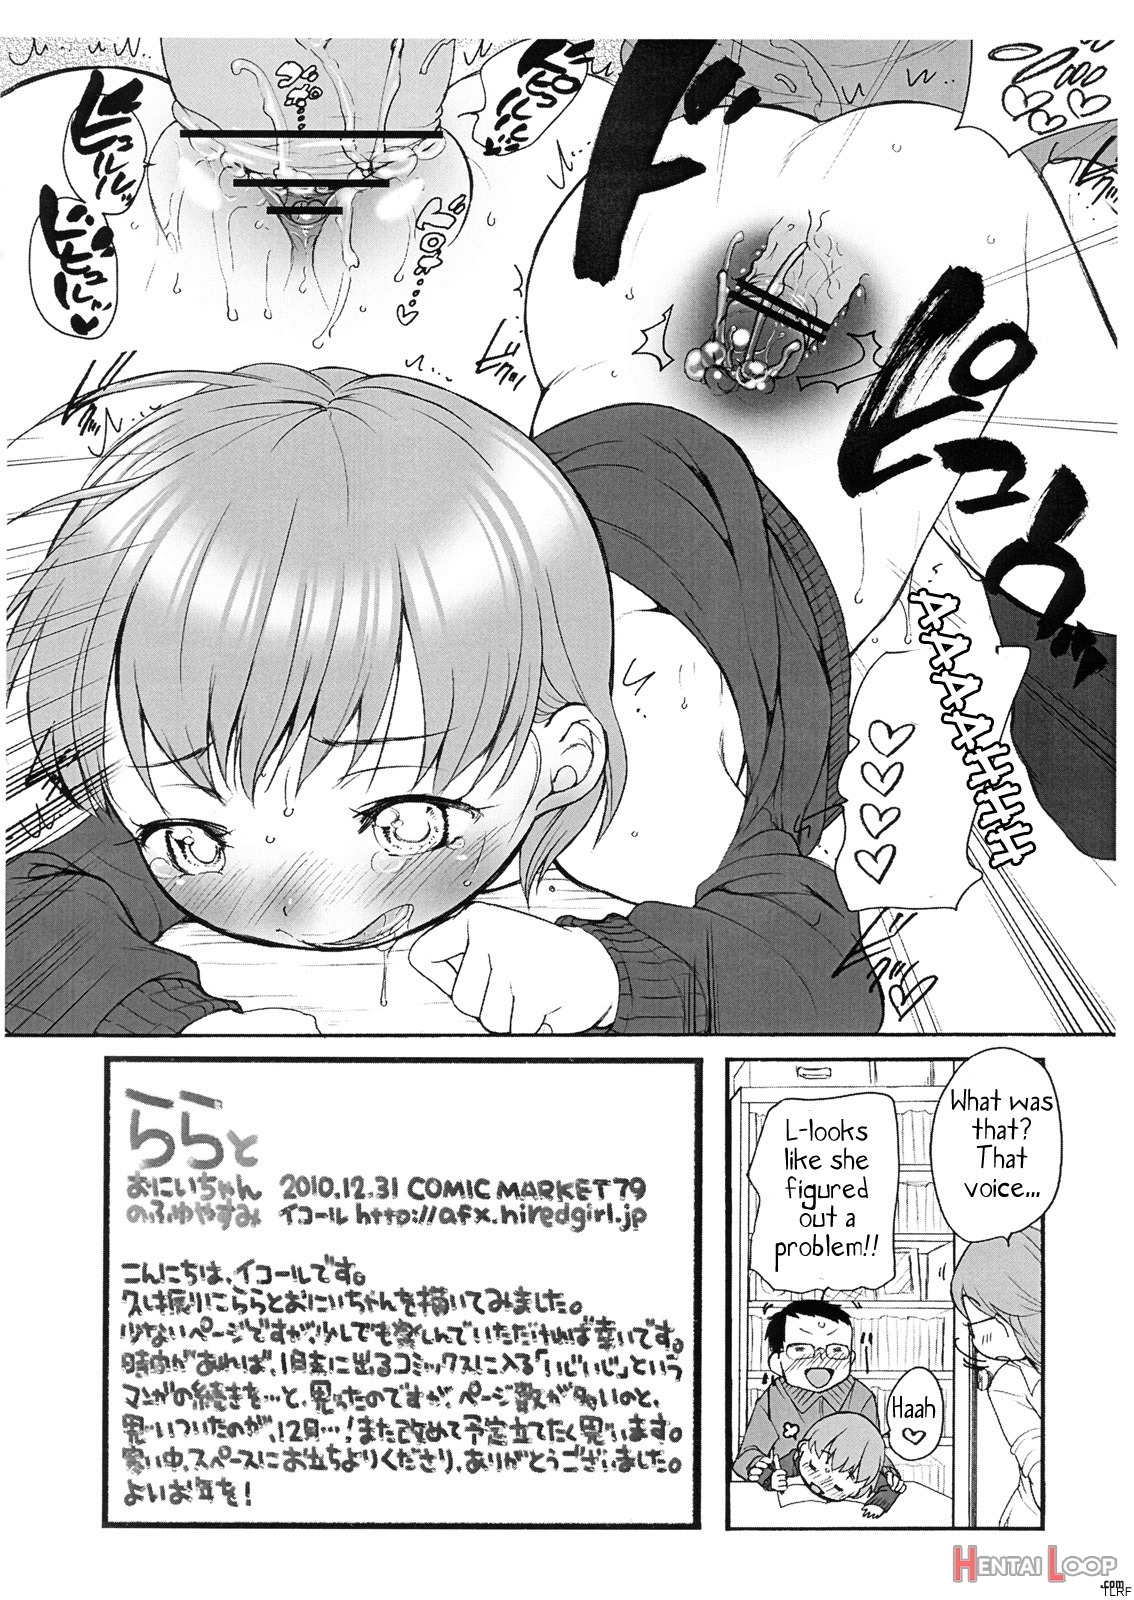 Lala And Onii-chan's Winter Vacation page 9